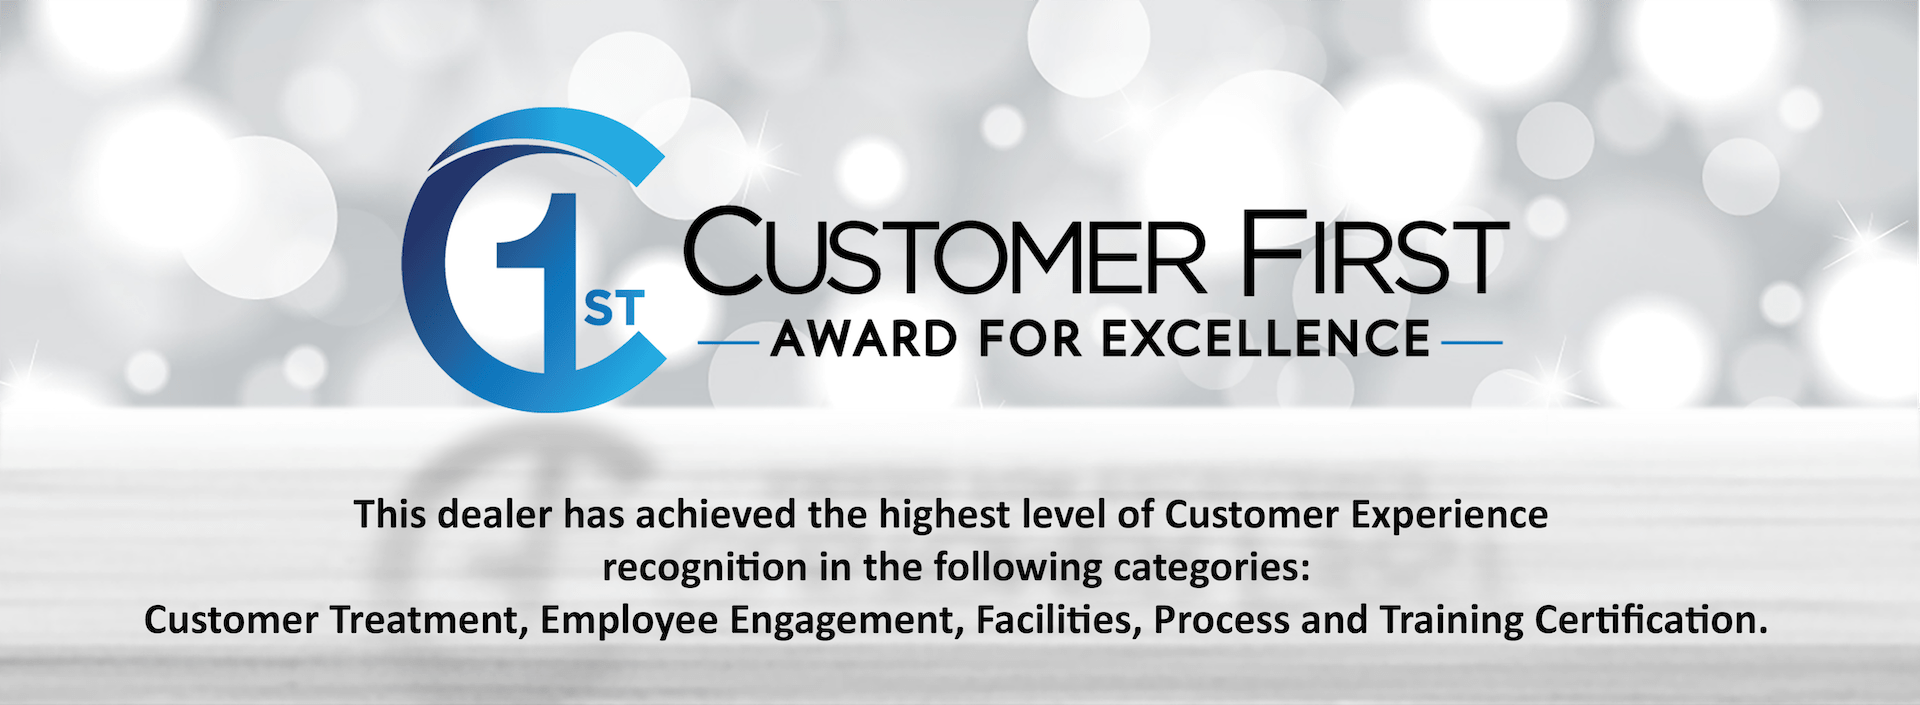 Customer First Award for Excellence at Security Dodge